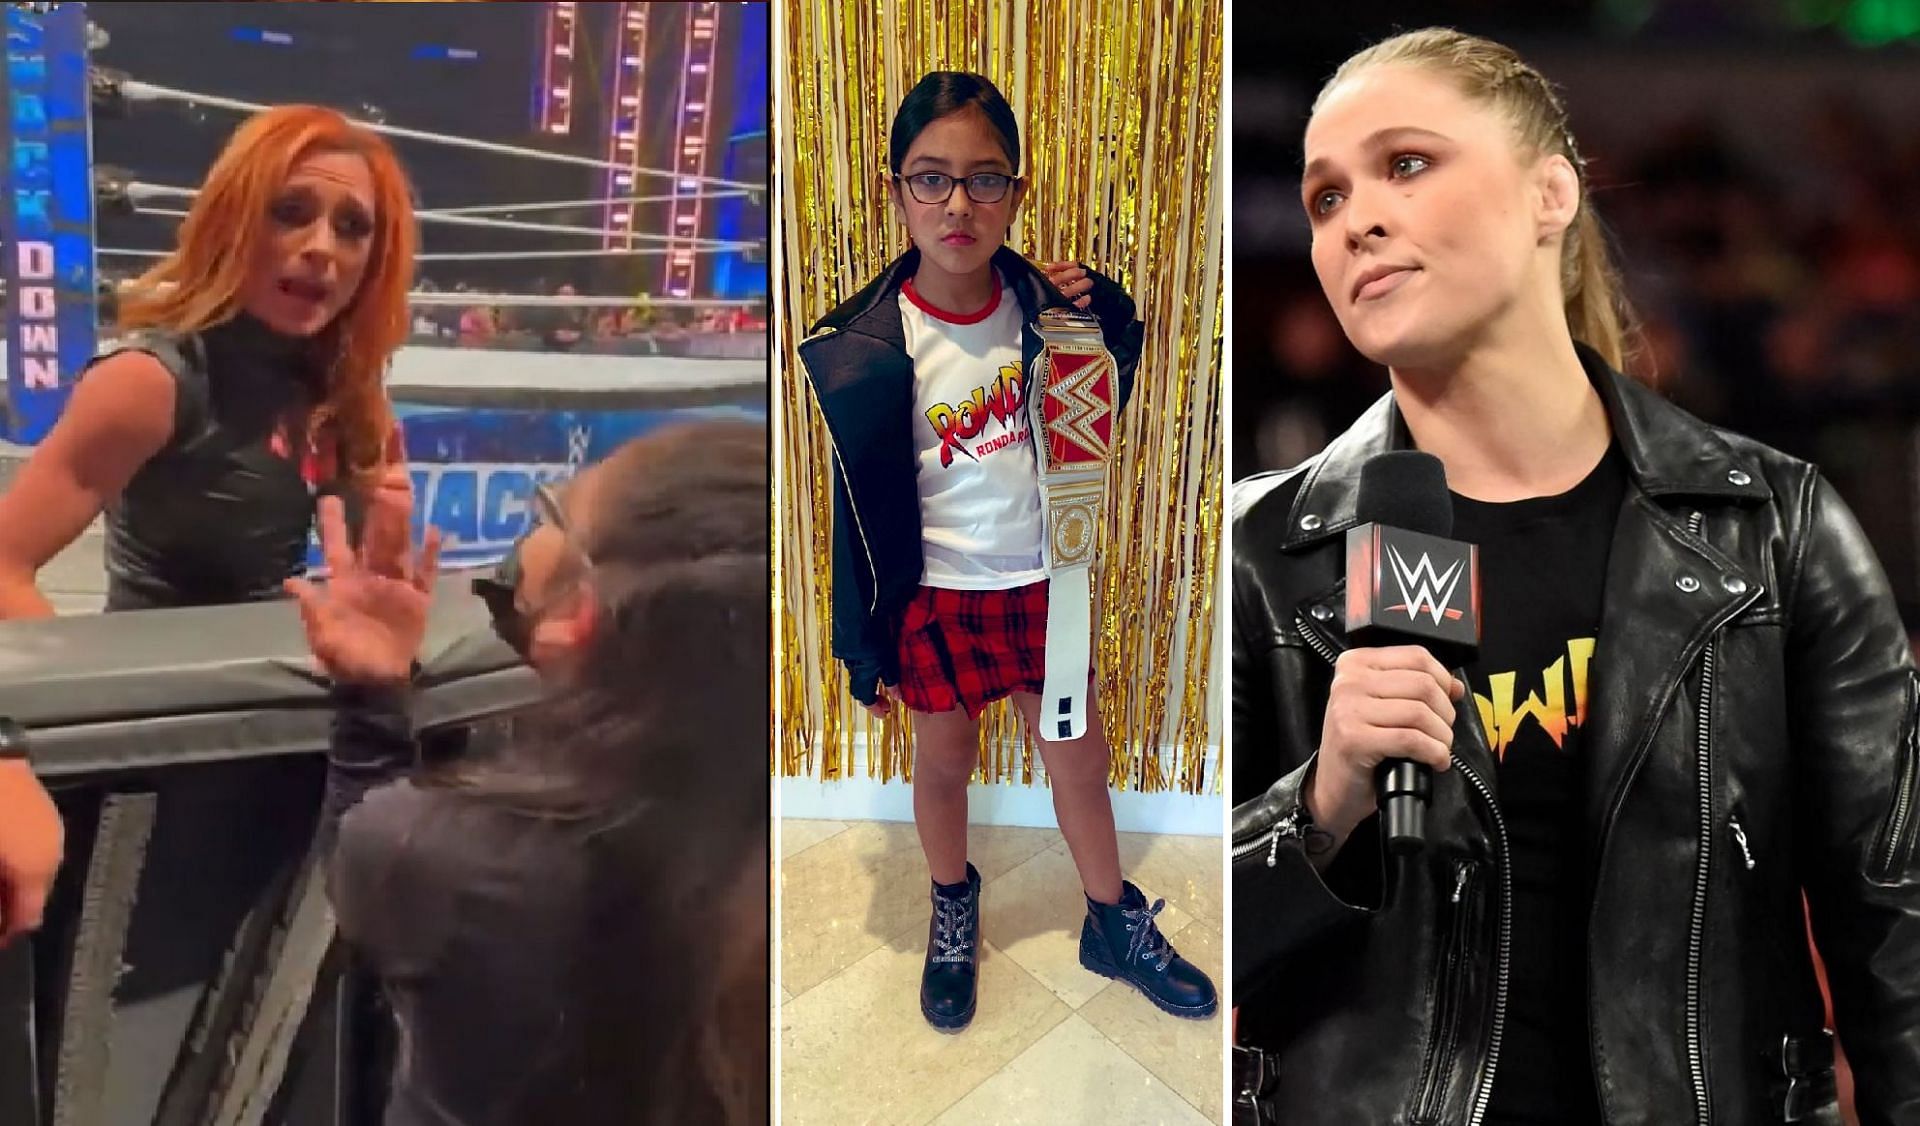 WWE's Becky Lynch Claps Back At Ronda Rousey On Twitter